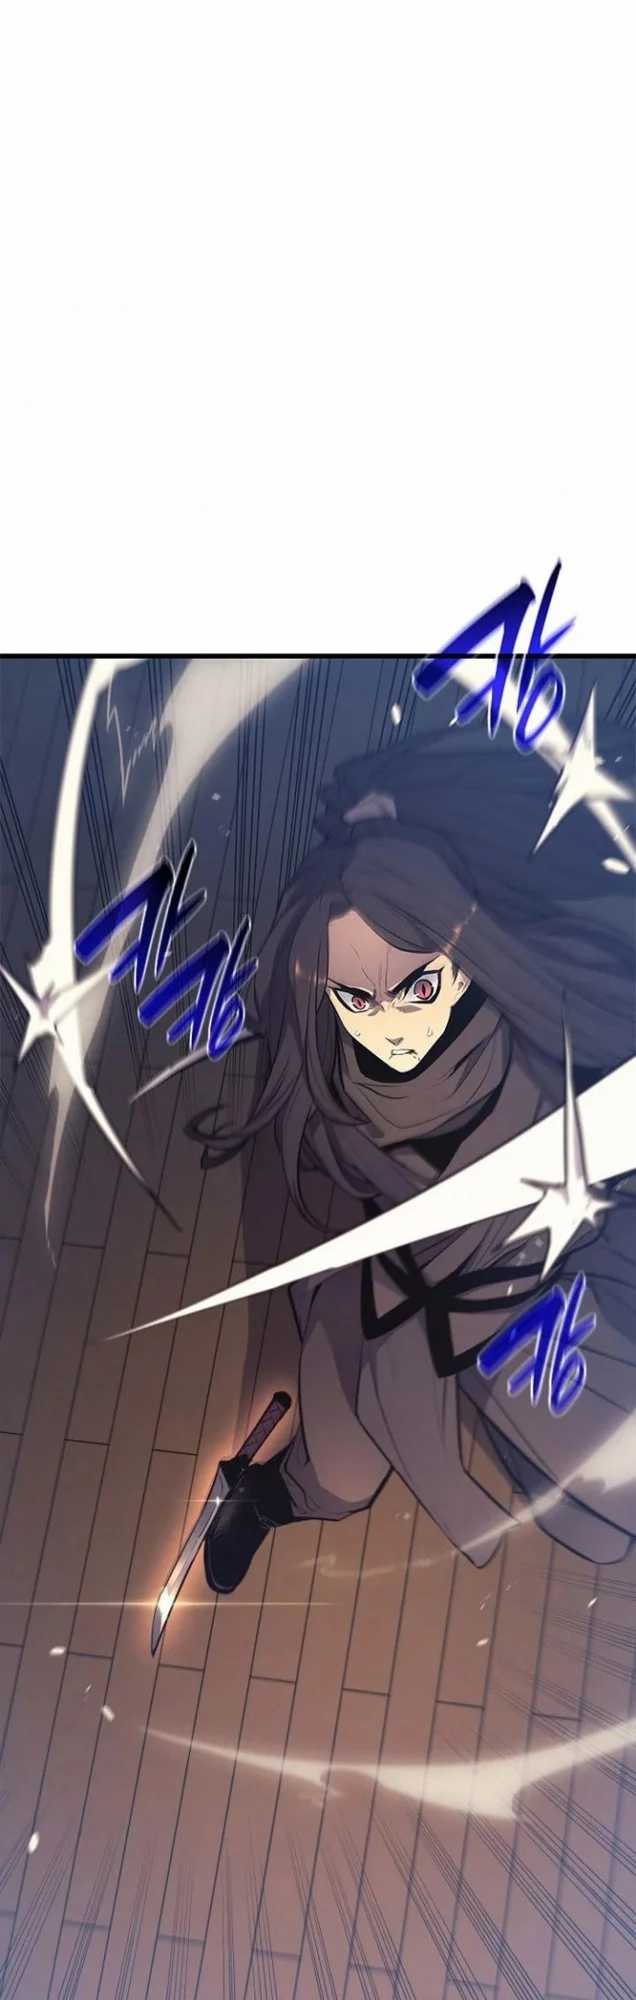 Grim Reaper of the Drifting Moon Chapter 20